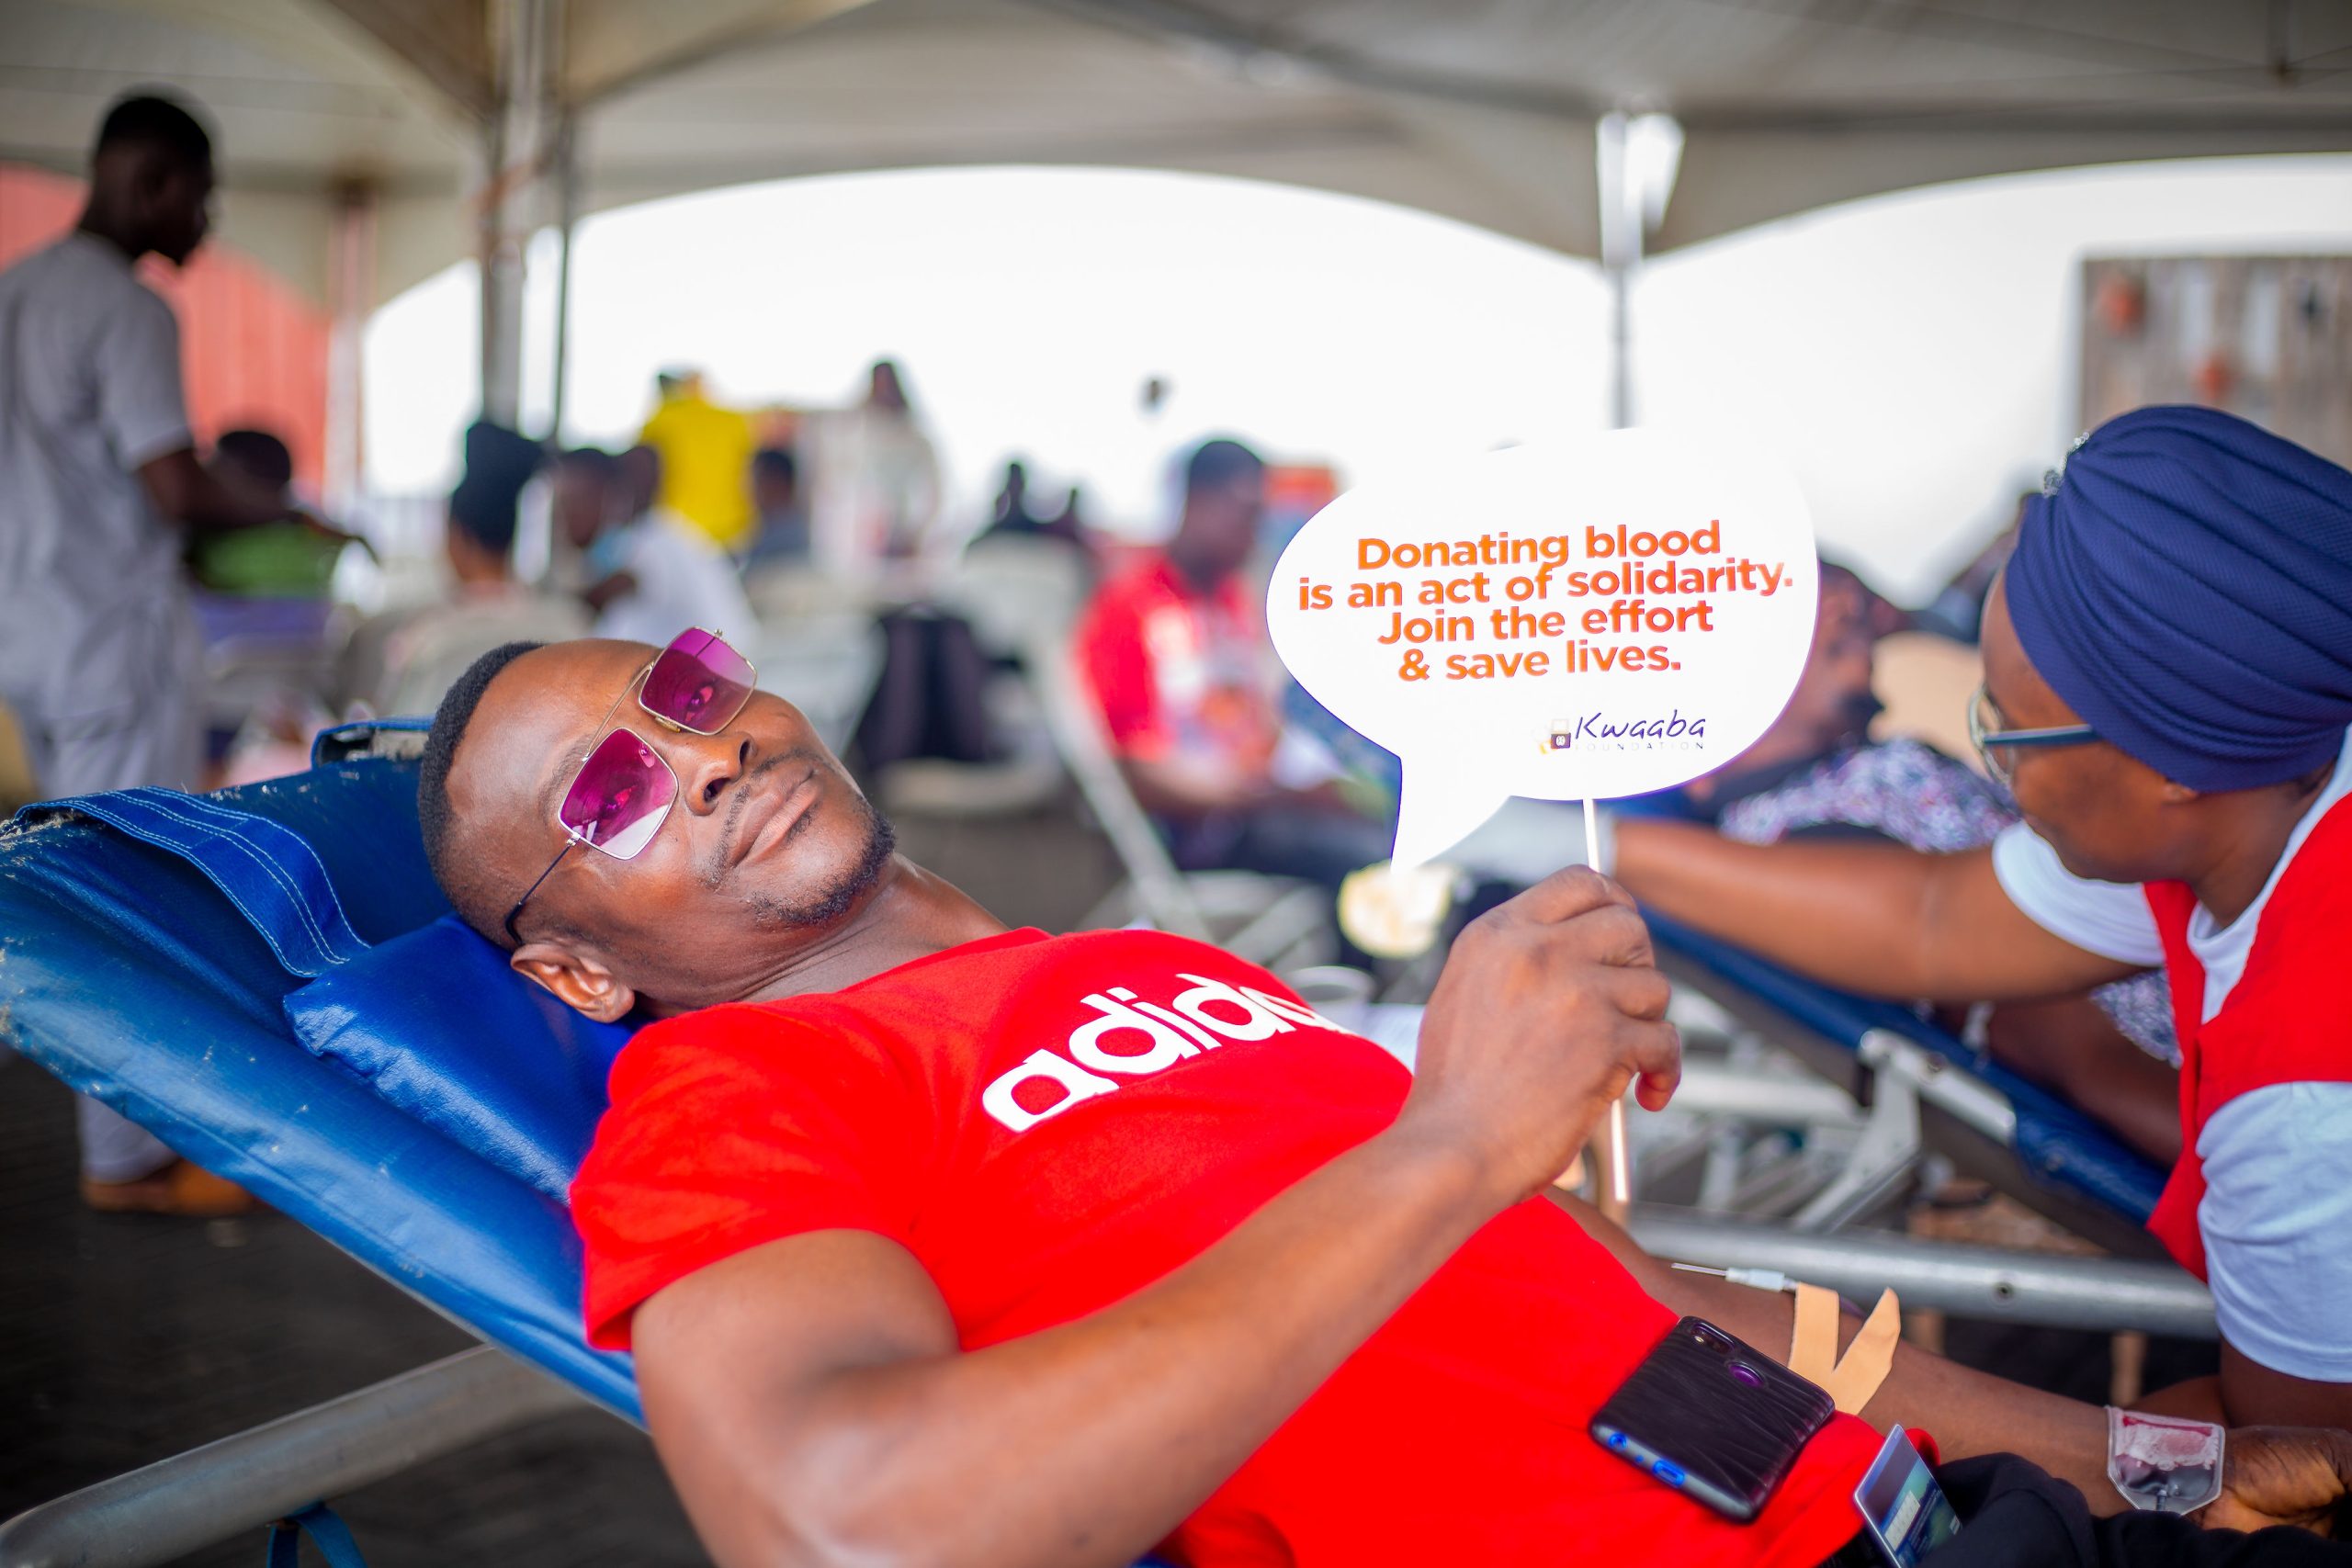 Kwaaba Foundation Partnering Kaysens Blood Donation (March 2023)